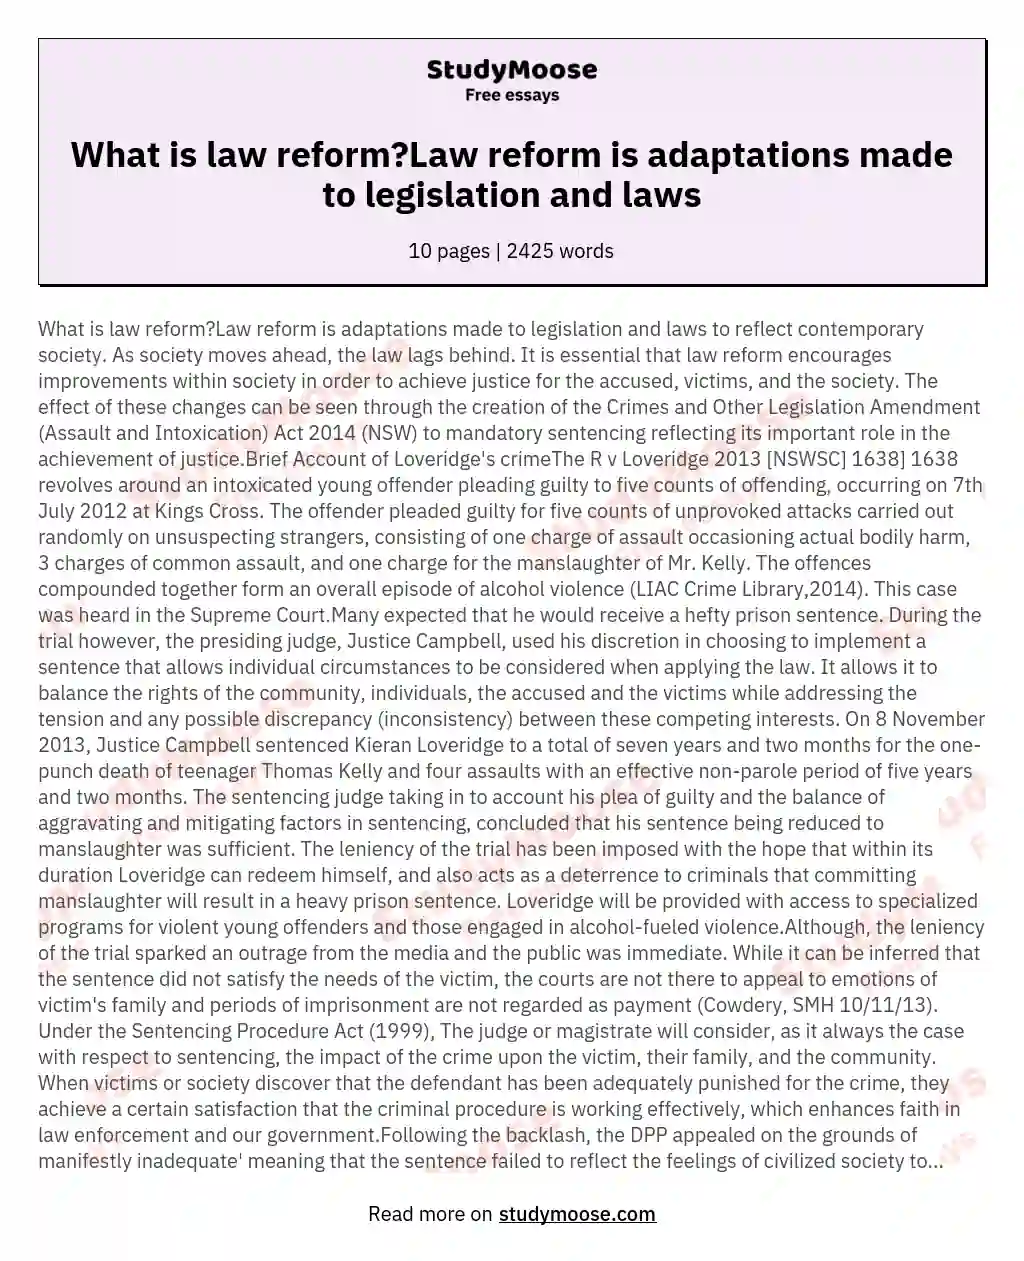 What is law reform?Law reform is adaptations made to legislation and laws